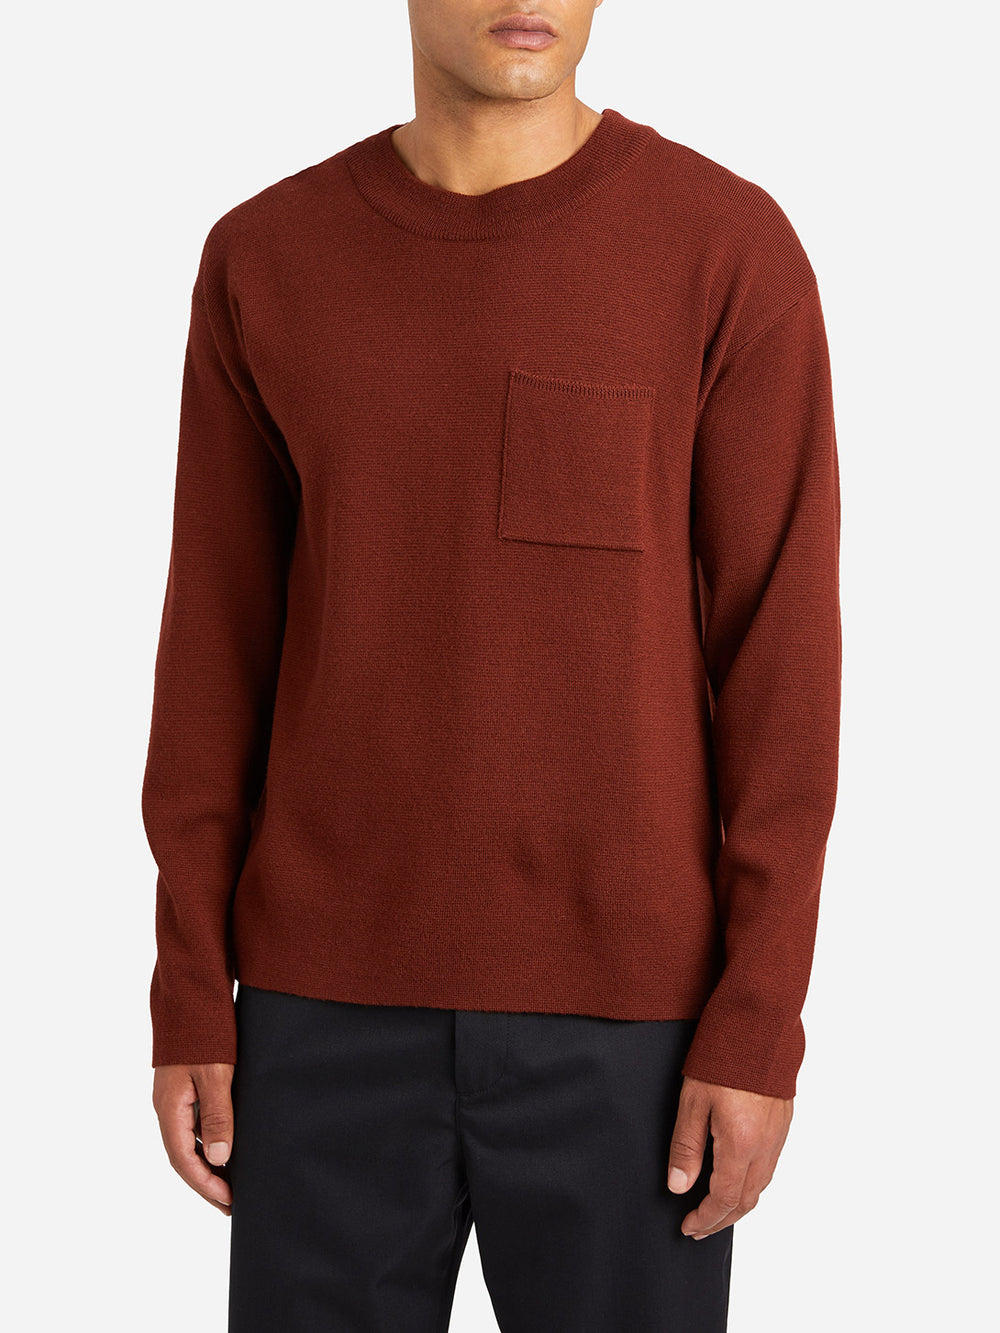 BURNT BRICK RED sweaters for men vincent pocket sweater ons clothing